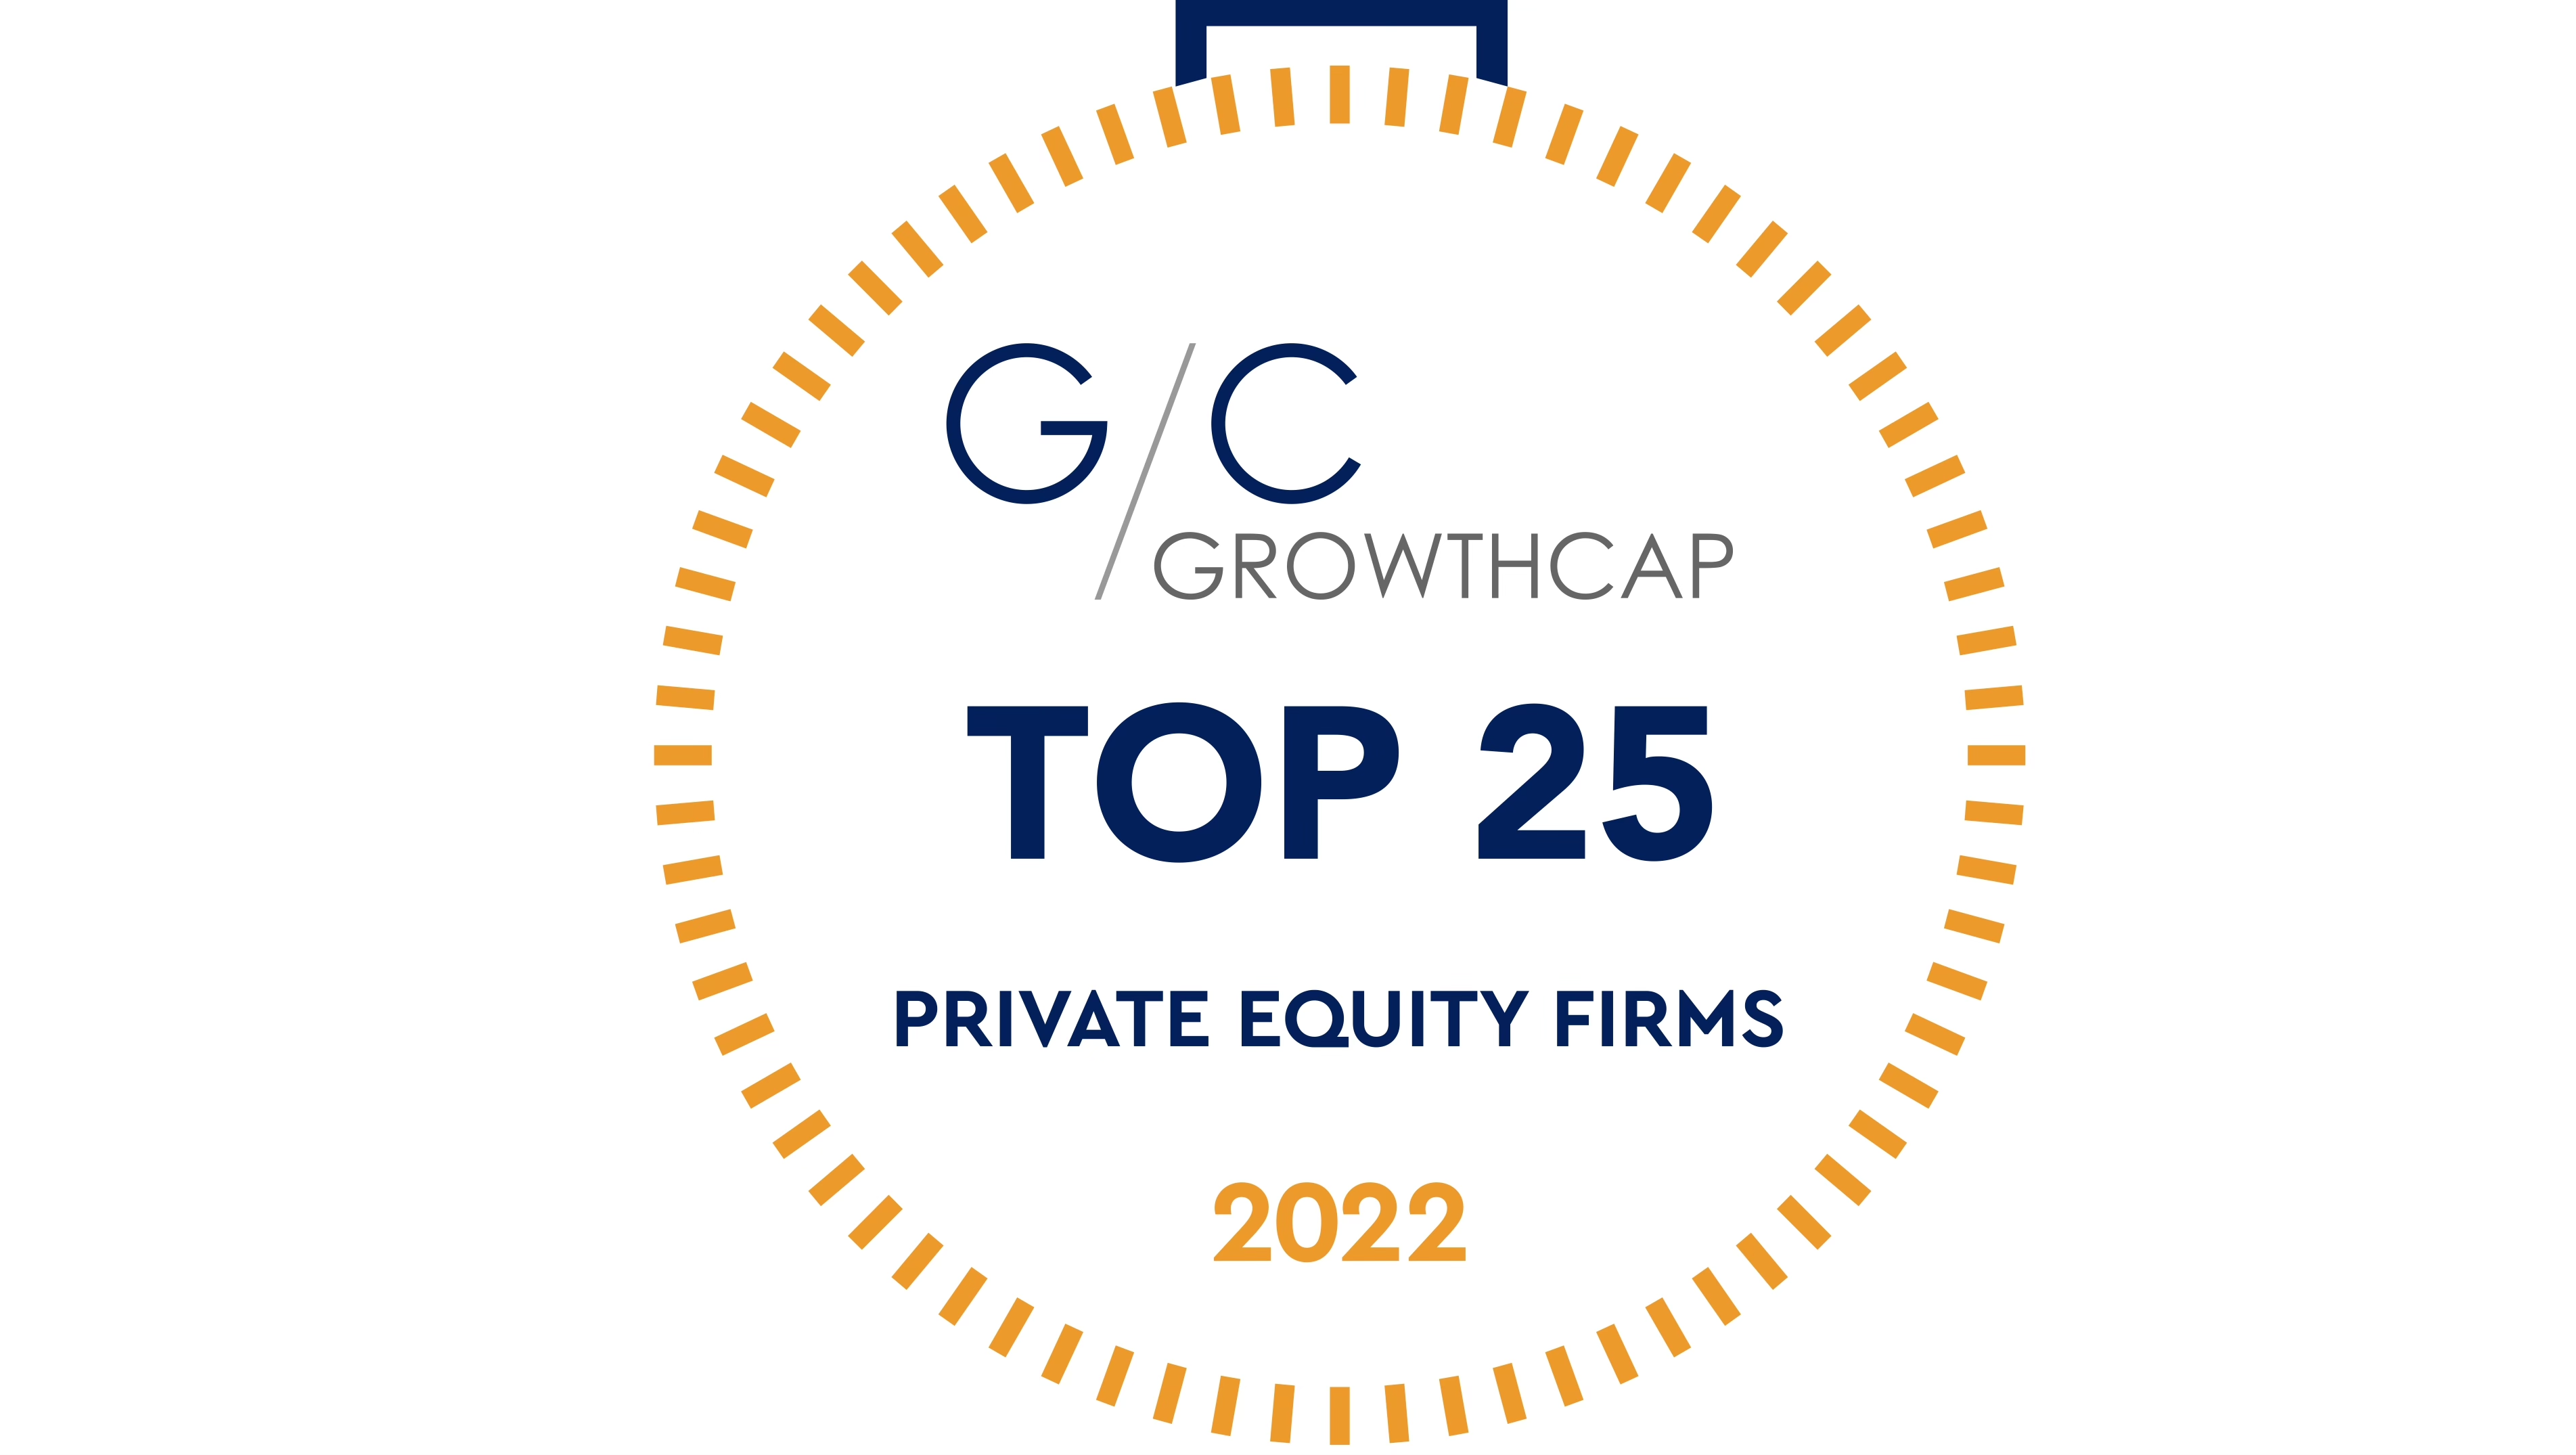 Top Private Equity Firms & Locations